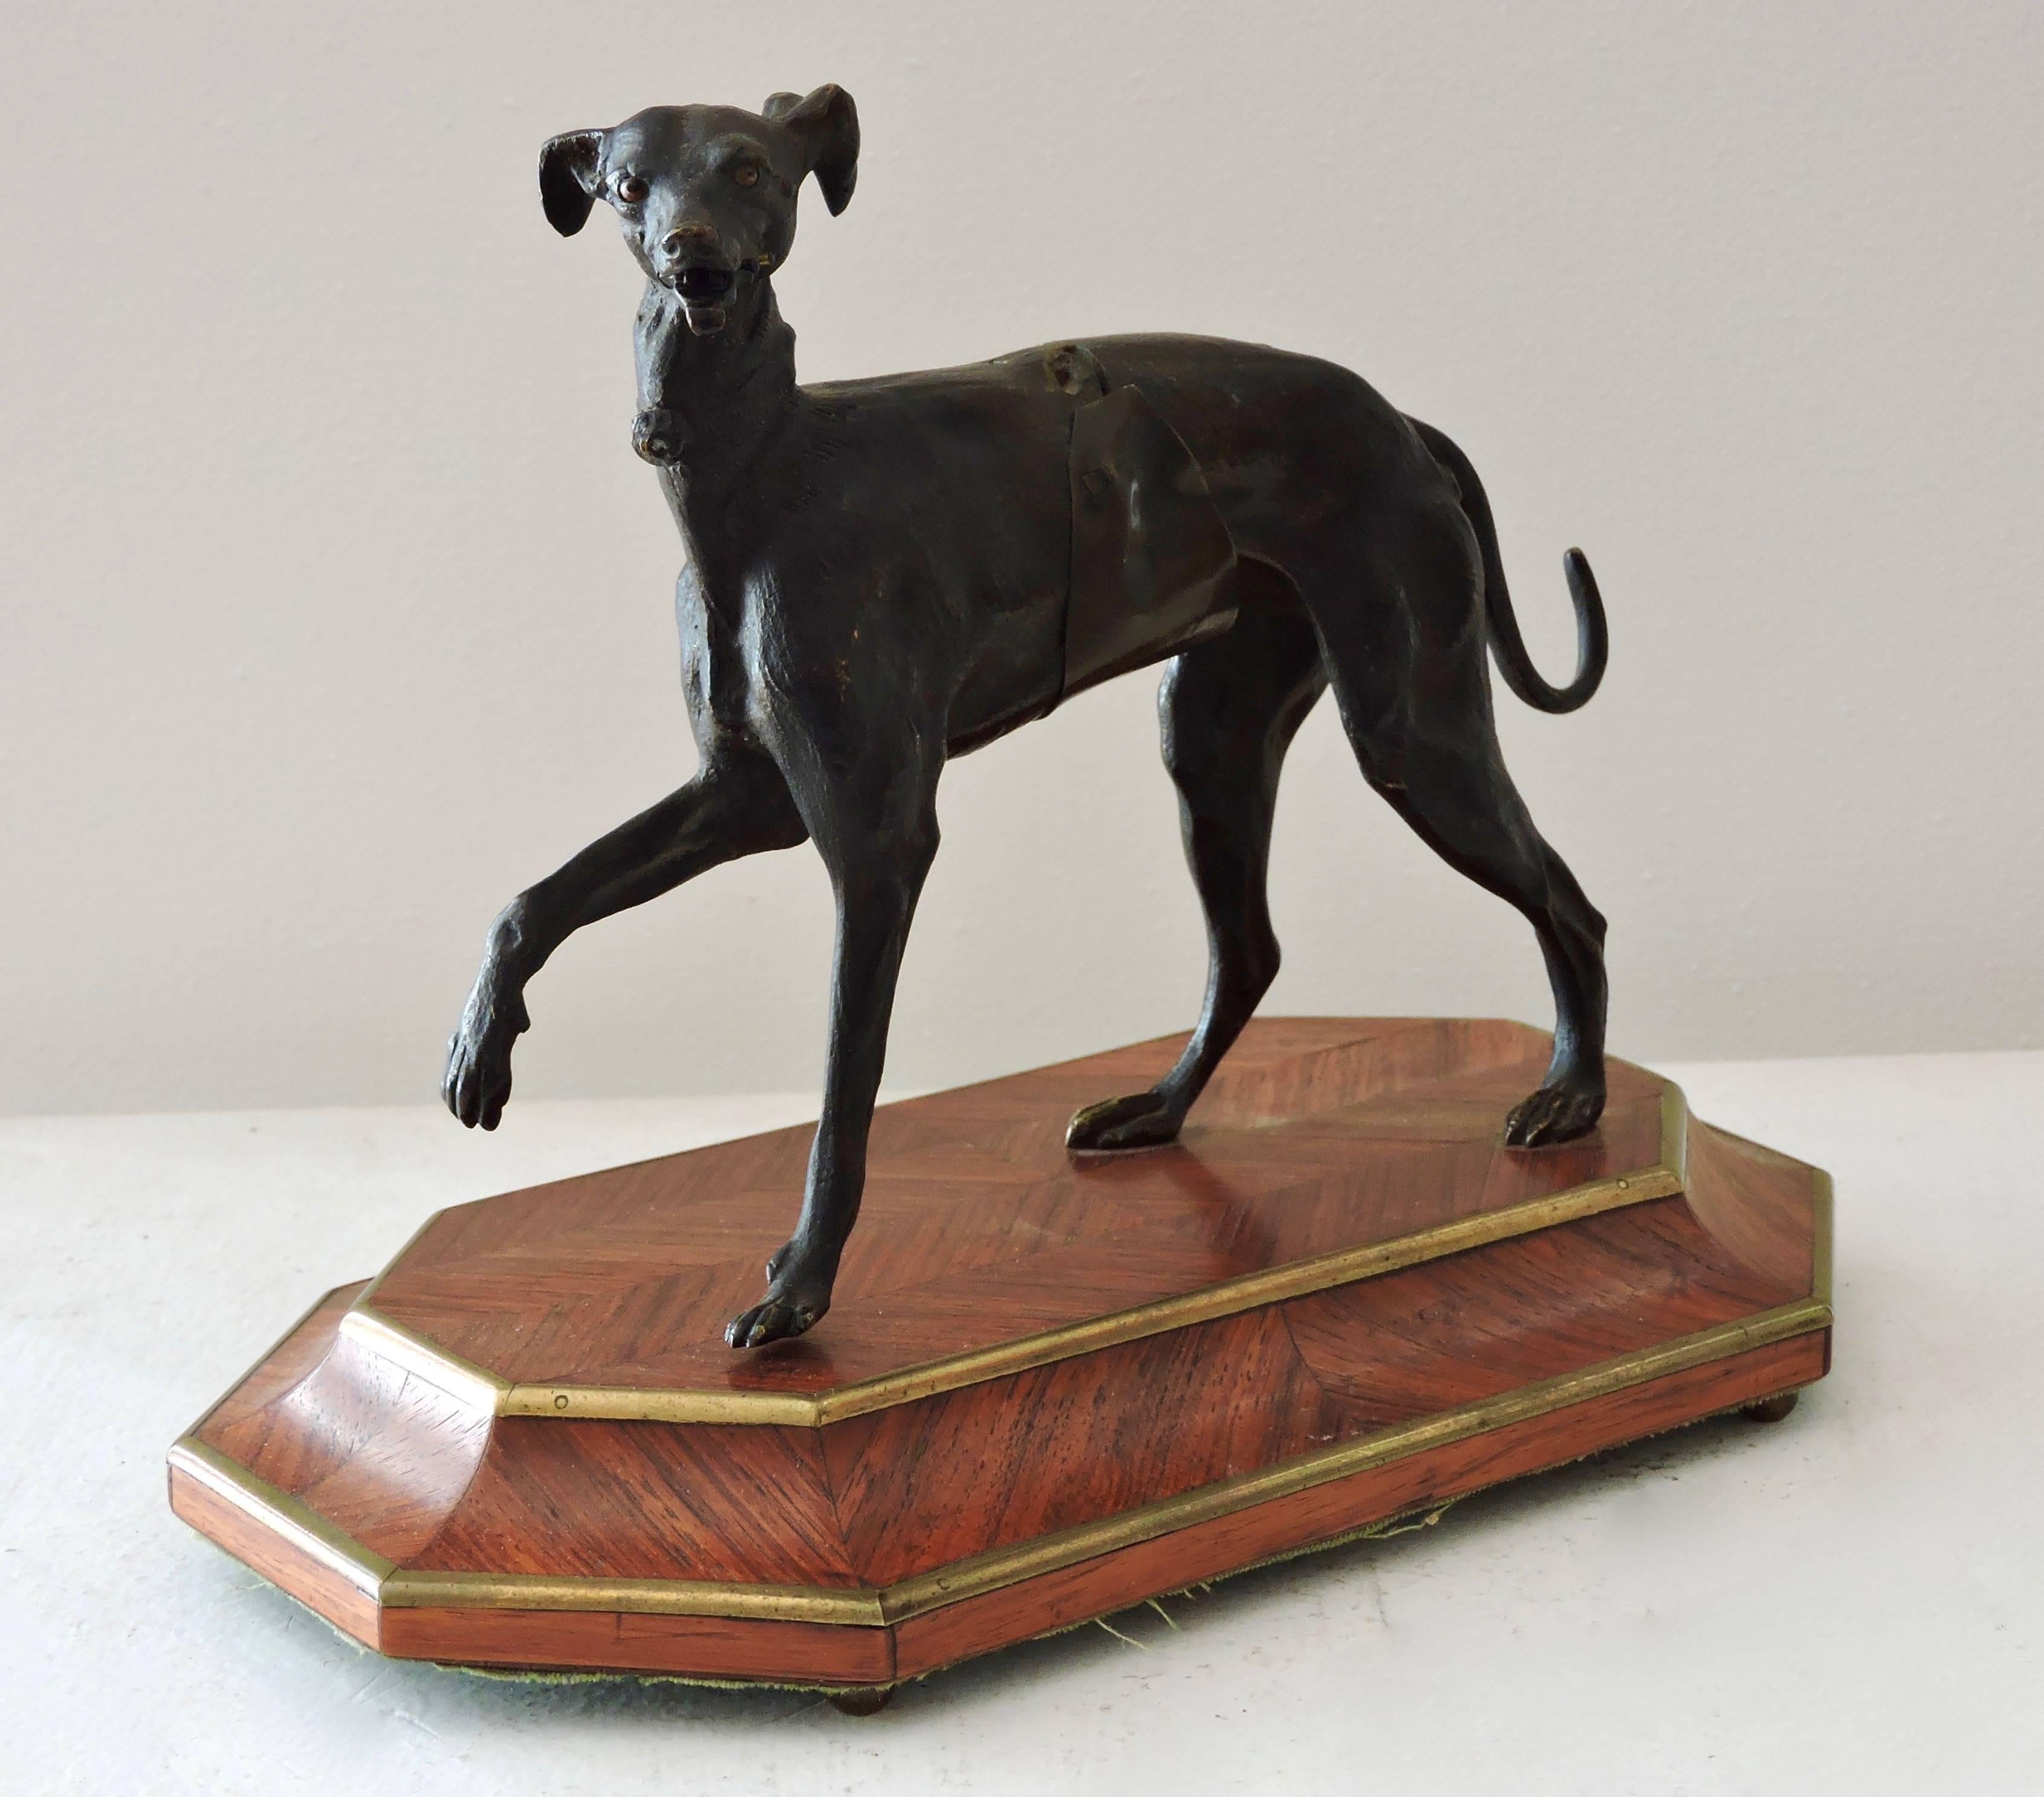 A 19th century patinated bronze and rosewood marquetry articulated greyhound cardholder.
Attributed to Maison Giroux Paris
Circa 1880